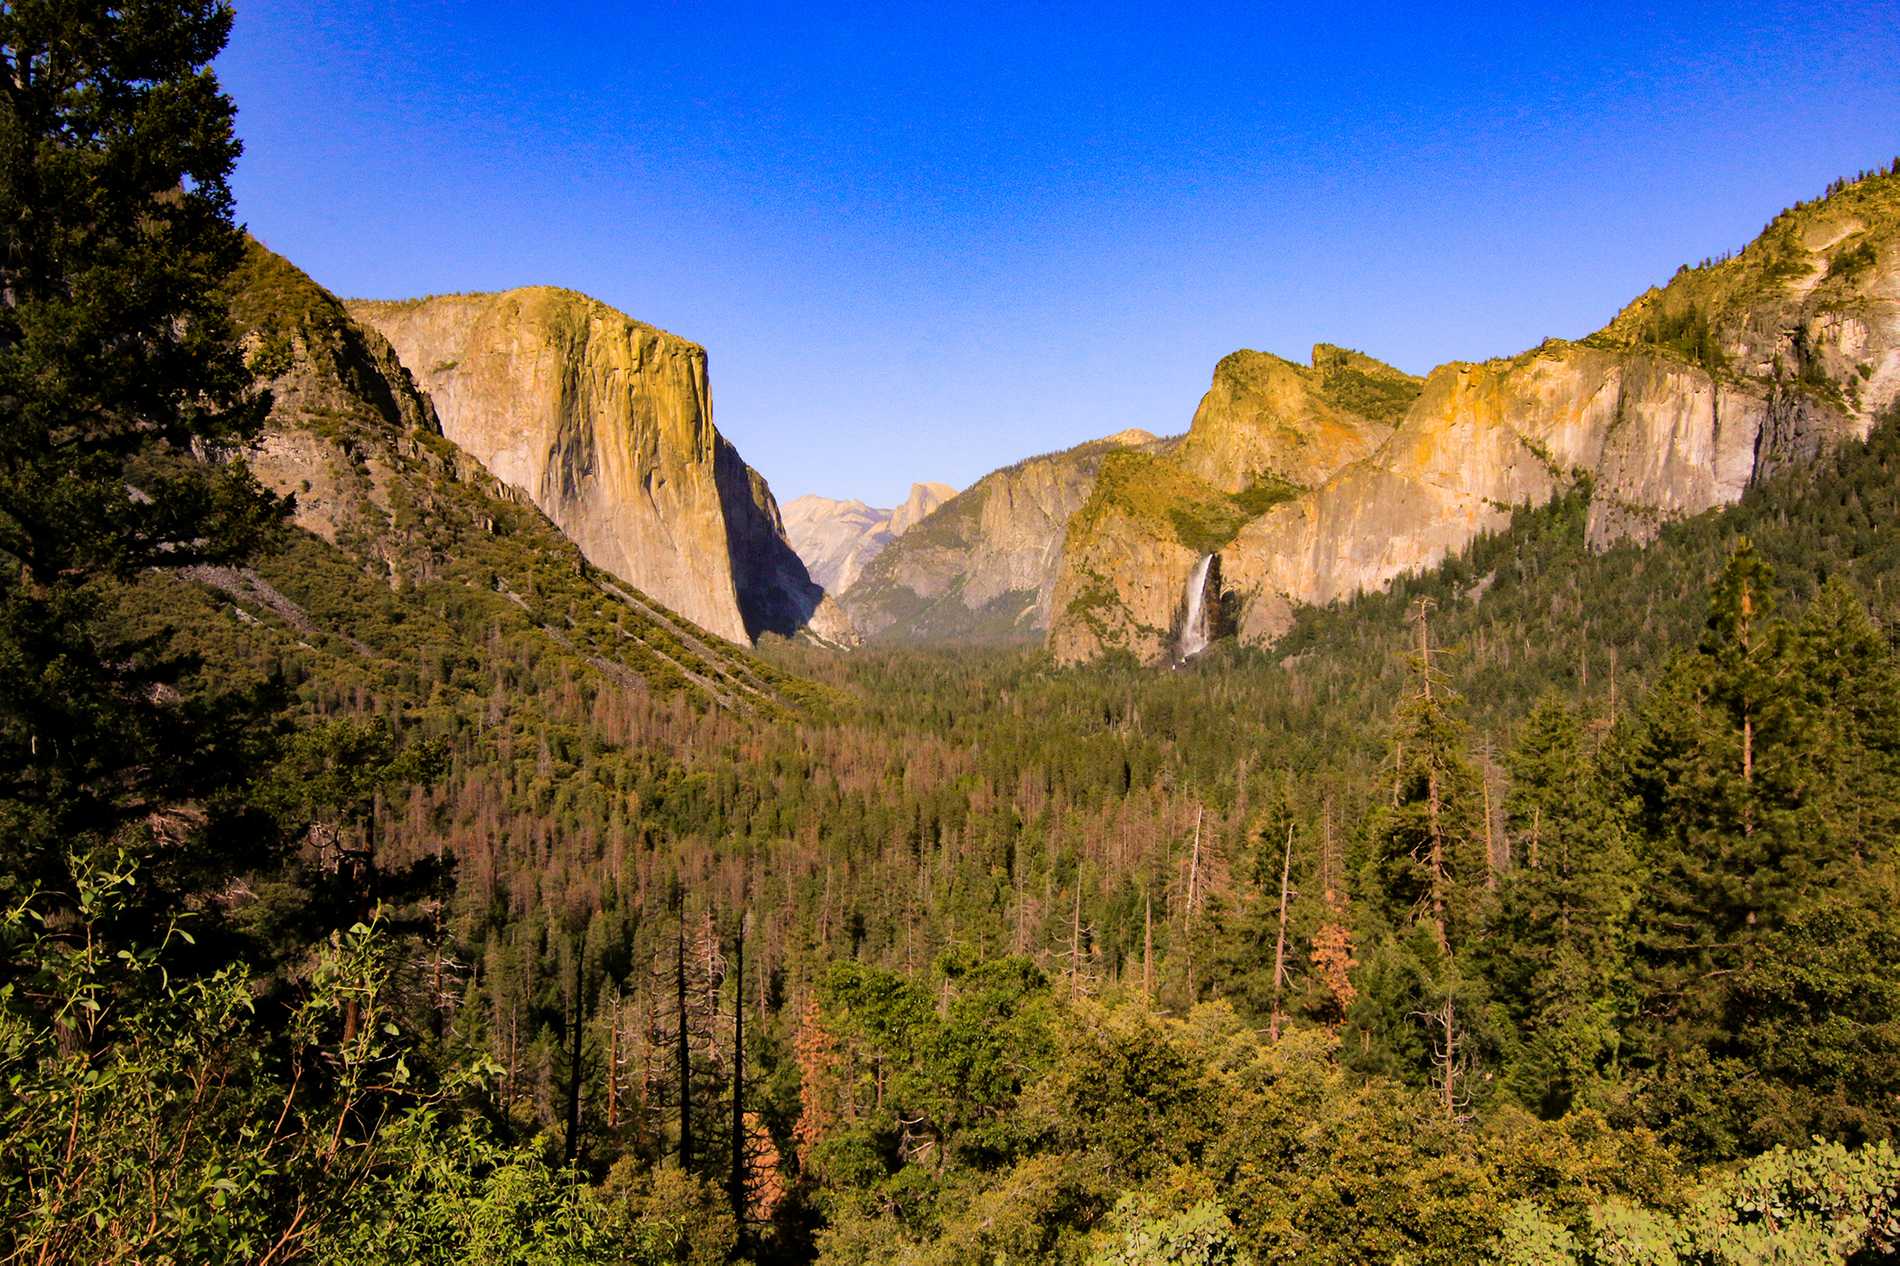 Tunnel View at Yosemite National Park with the southwest face of El Capitan on the left, Half Dome on axis, and Bridalveil Fall on the right.